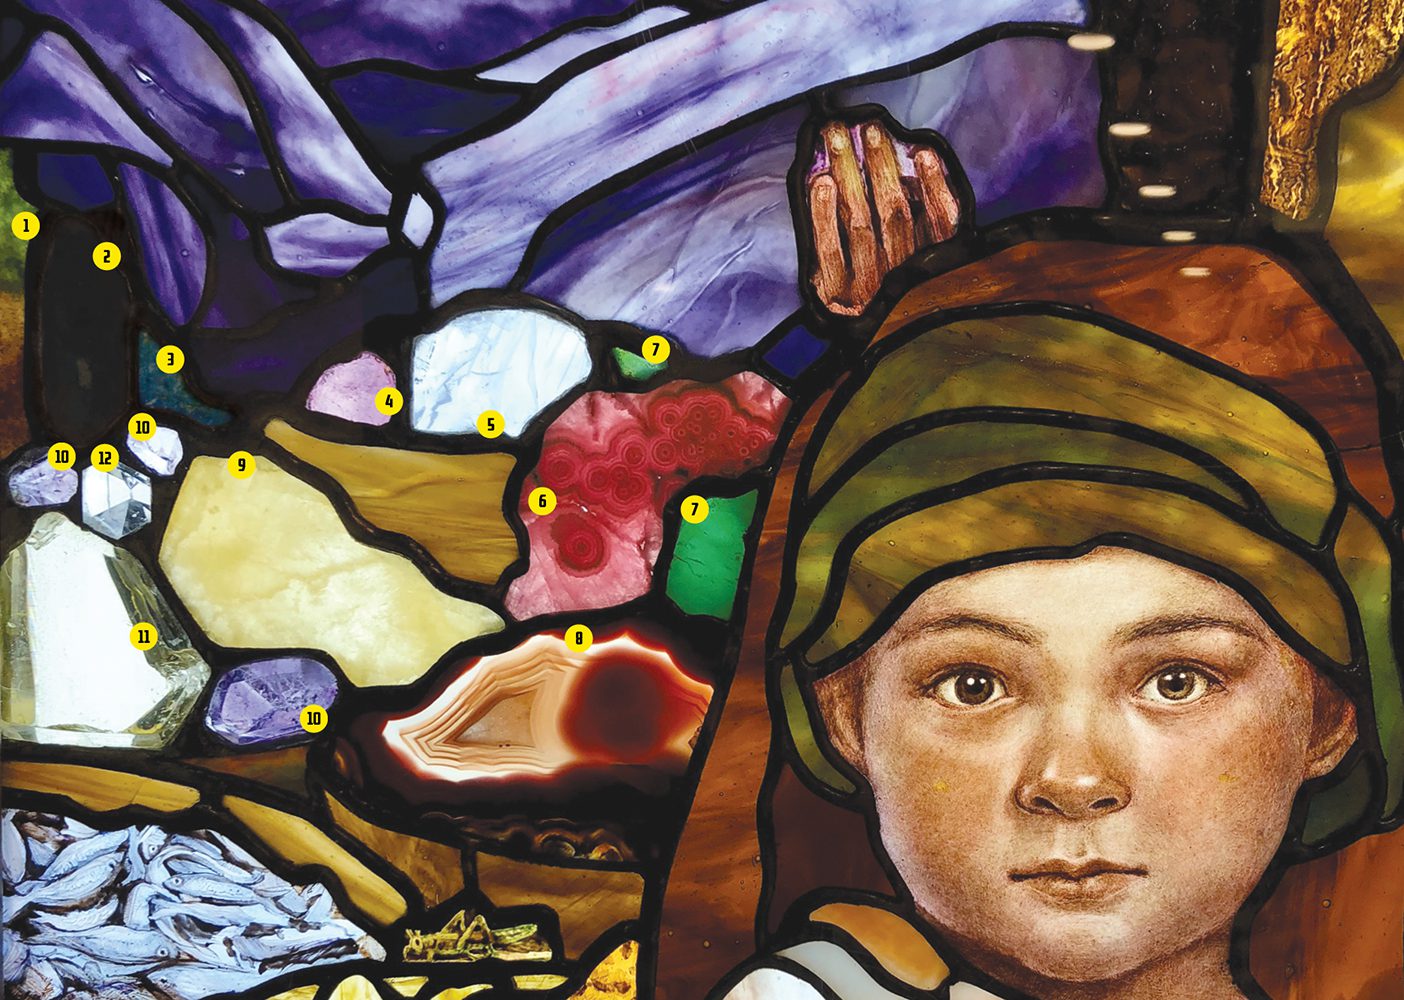 A picture of part of the stained-glass mural in the Rome Italy Temple Visitors' Center showing rocks from all over the world.